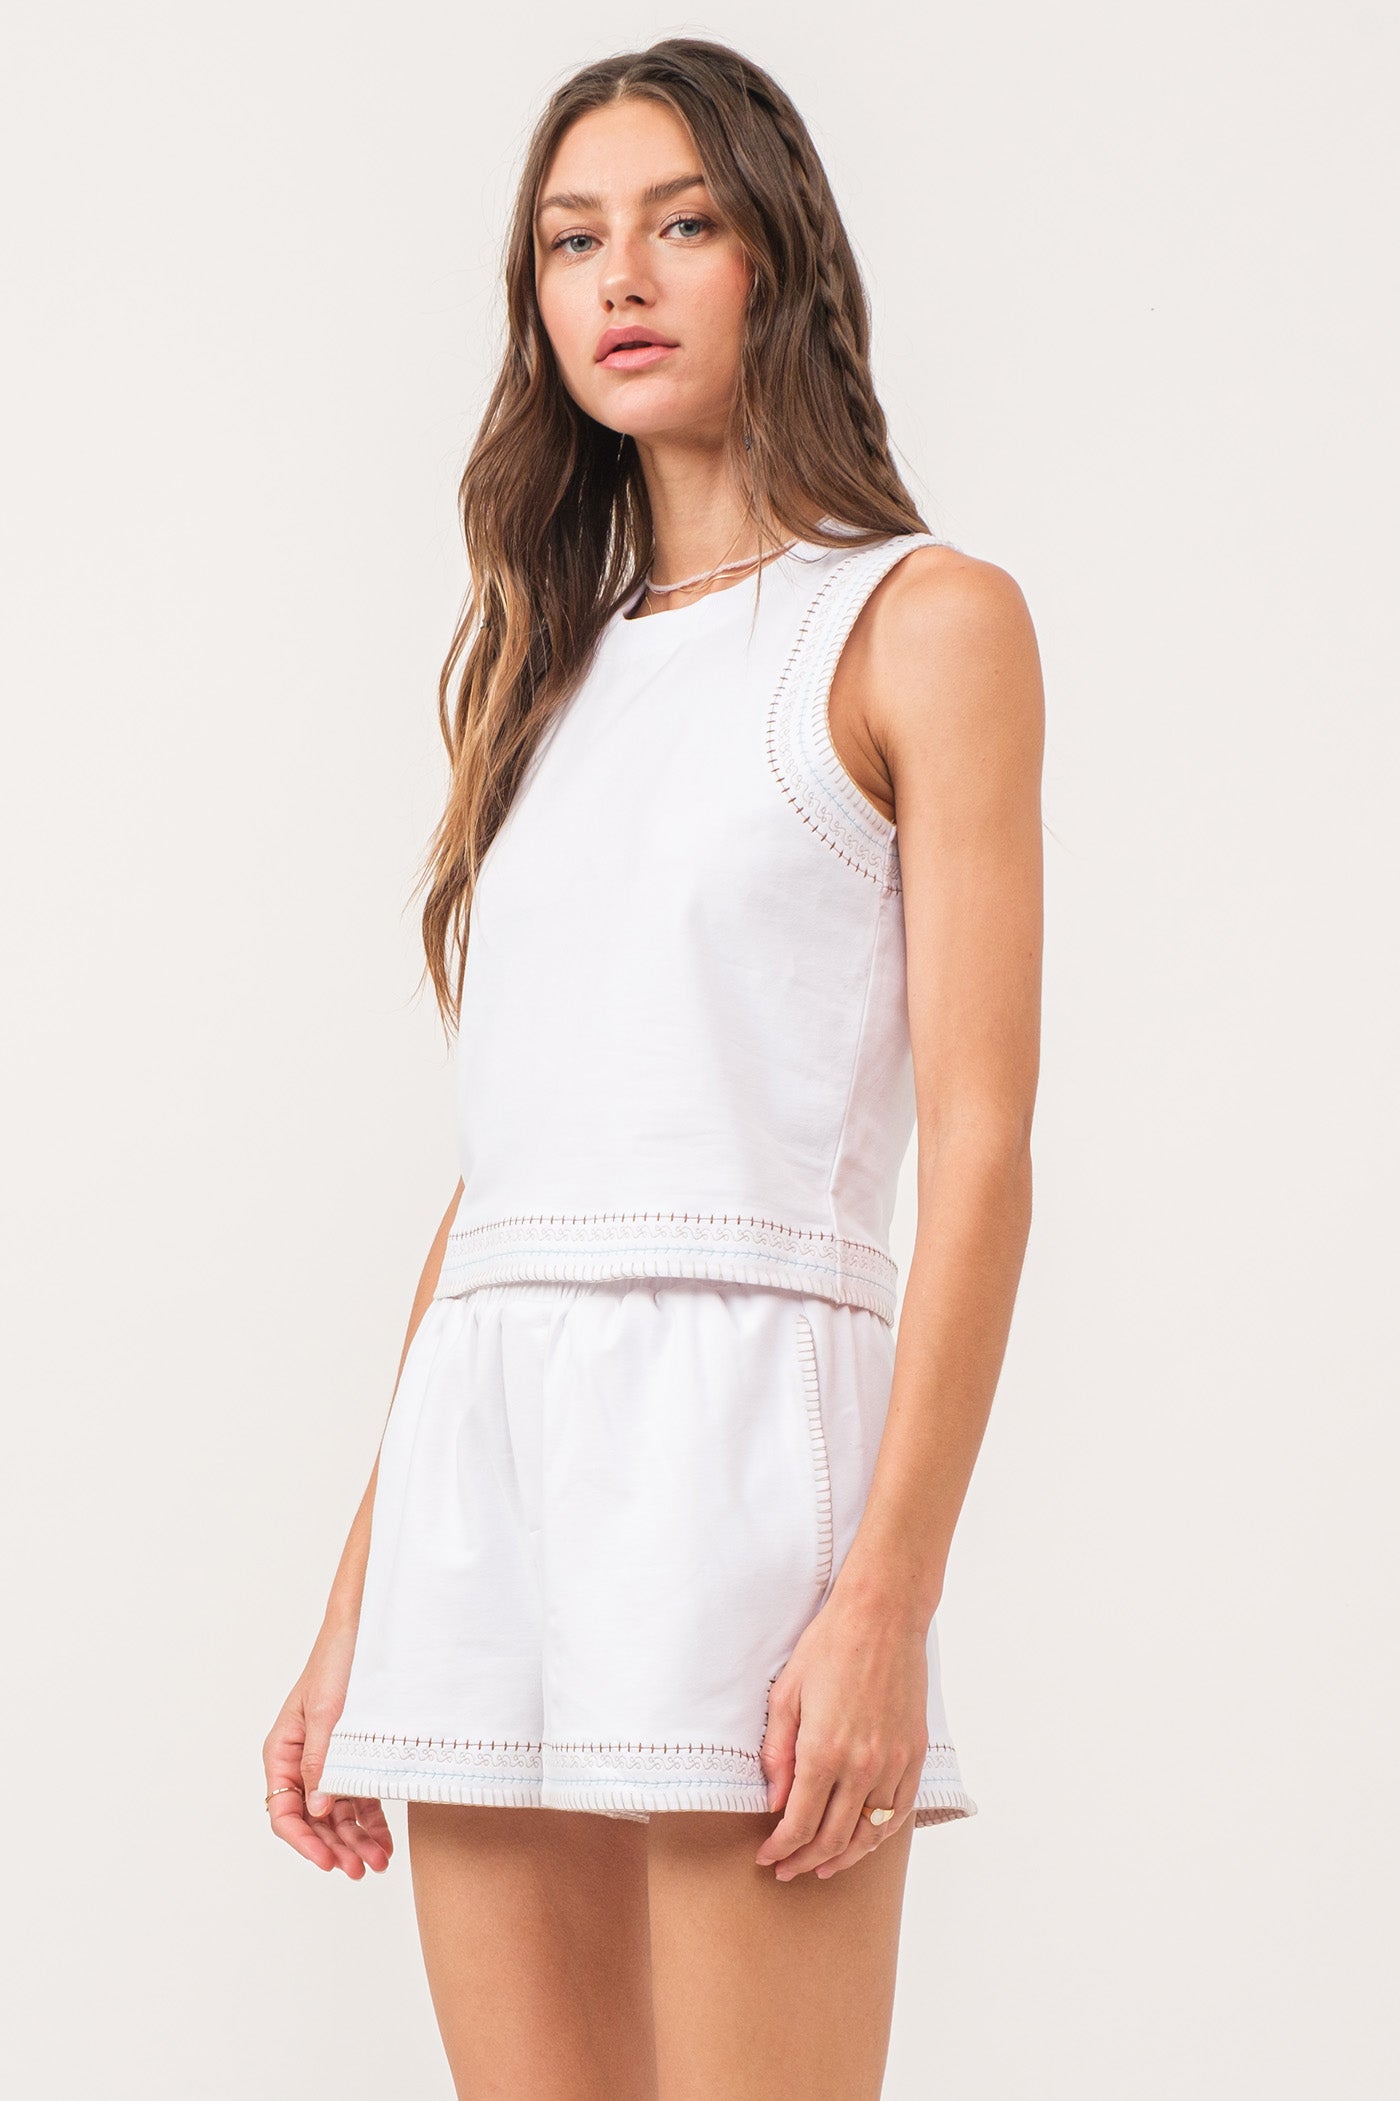 Haleign Tank White With Embroidery